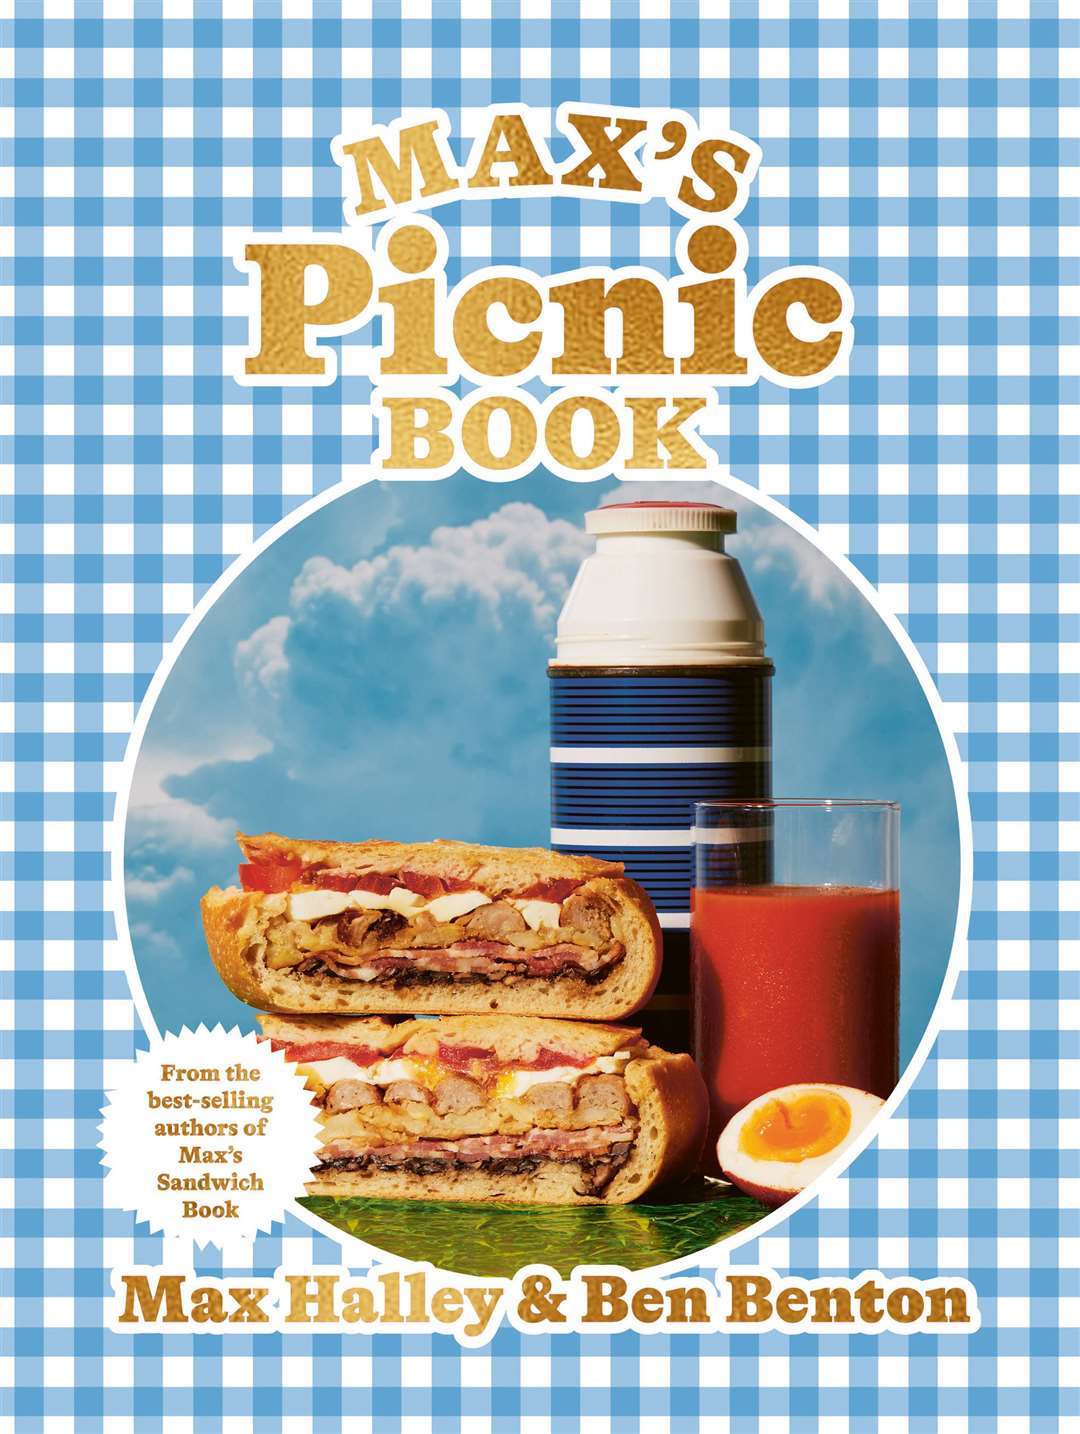 Max's Picnic Book by Max Halley and Ben Benton (Hardie Grant, £16.99). Available now. Picture: Louise Hagger/PA